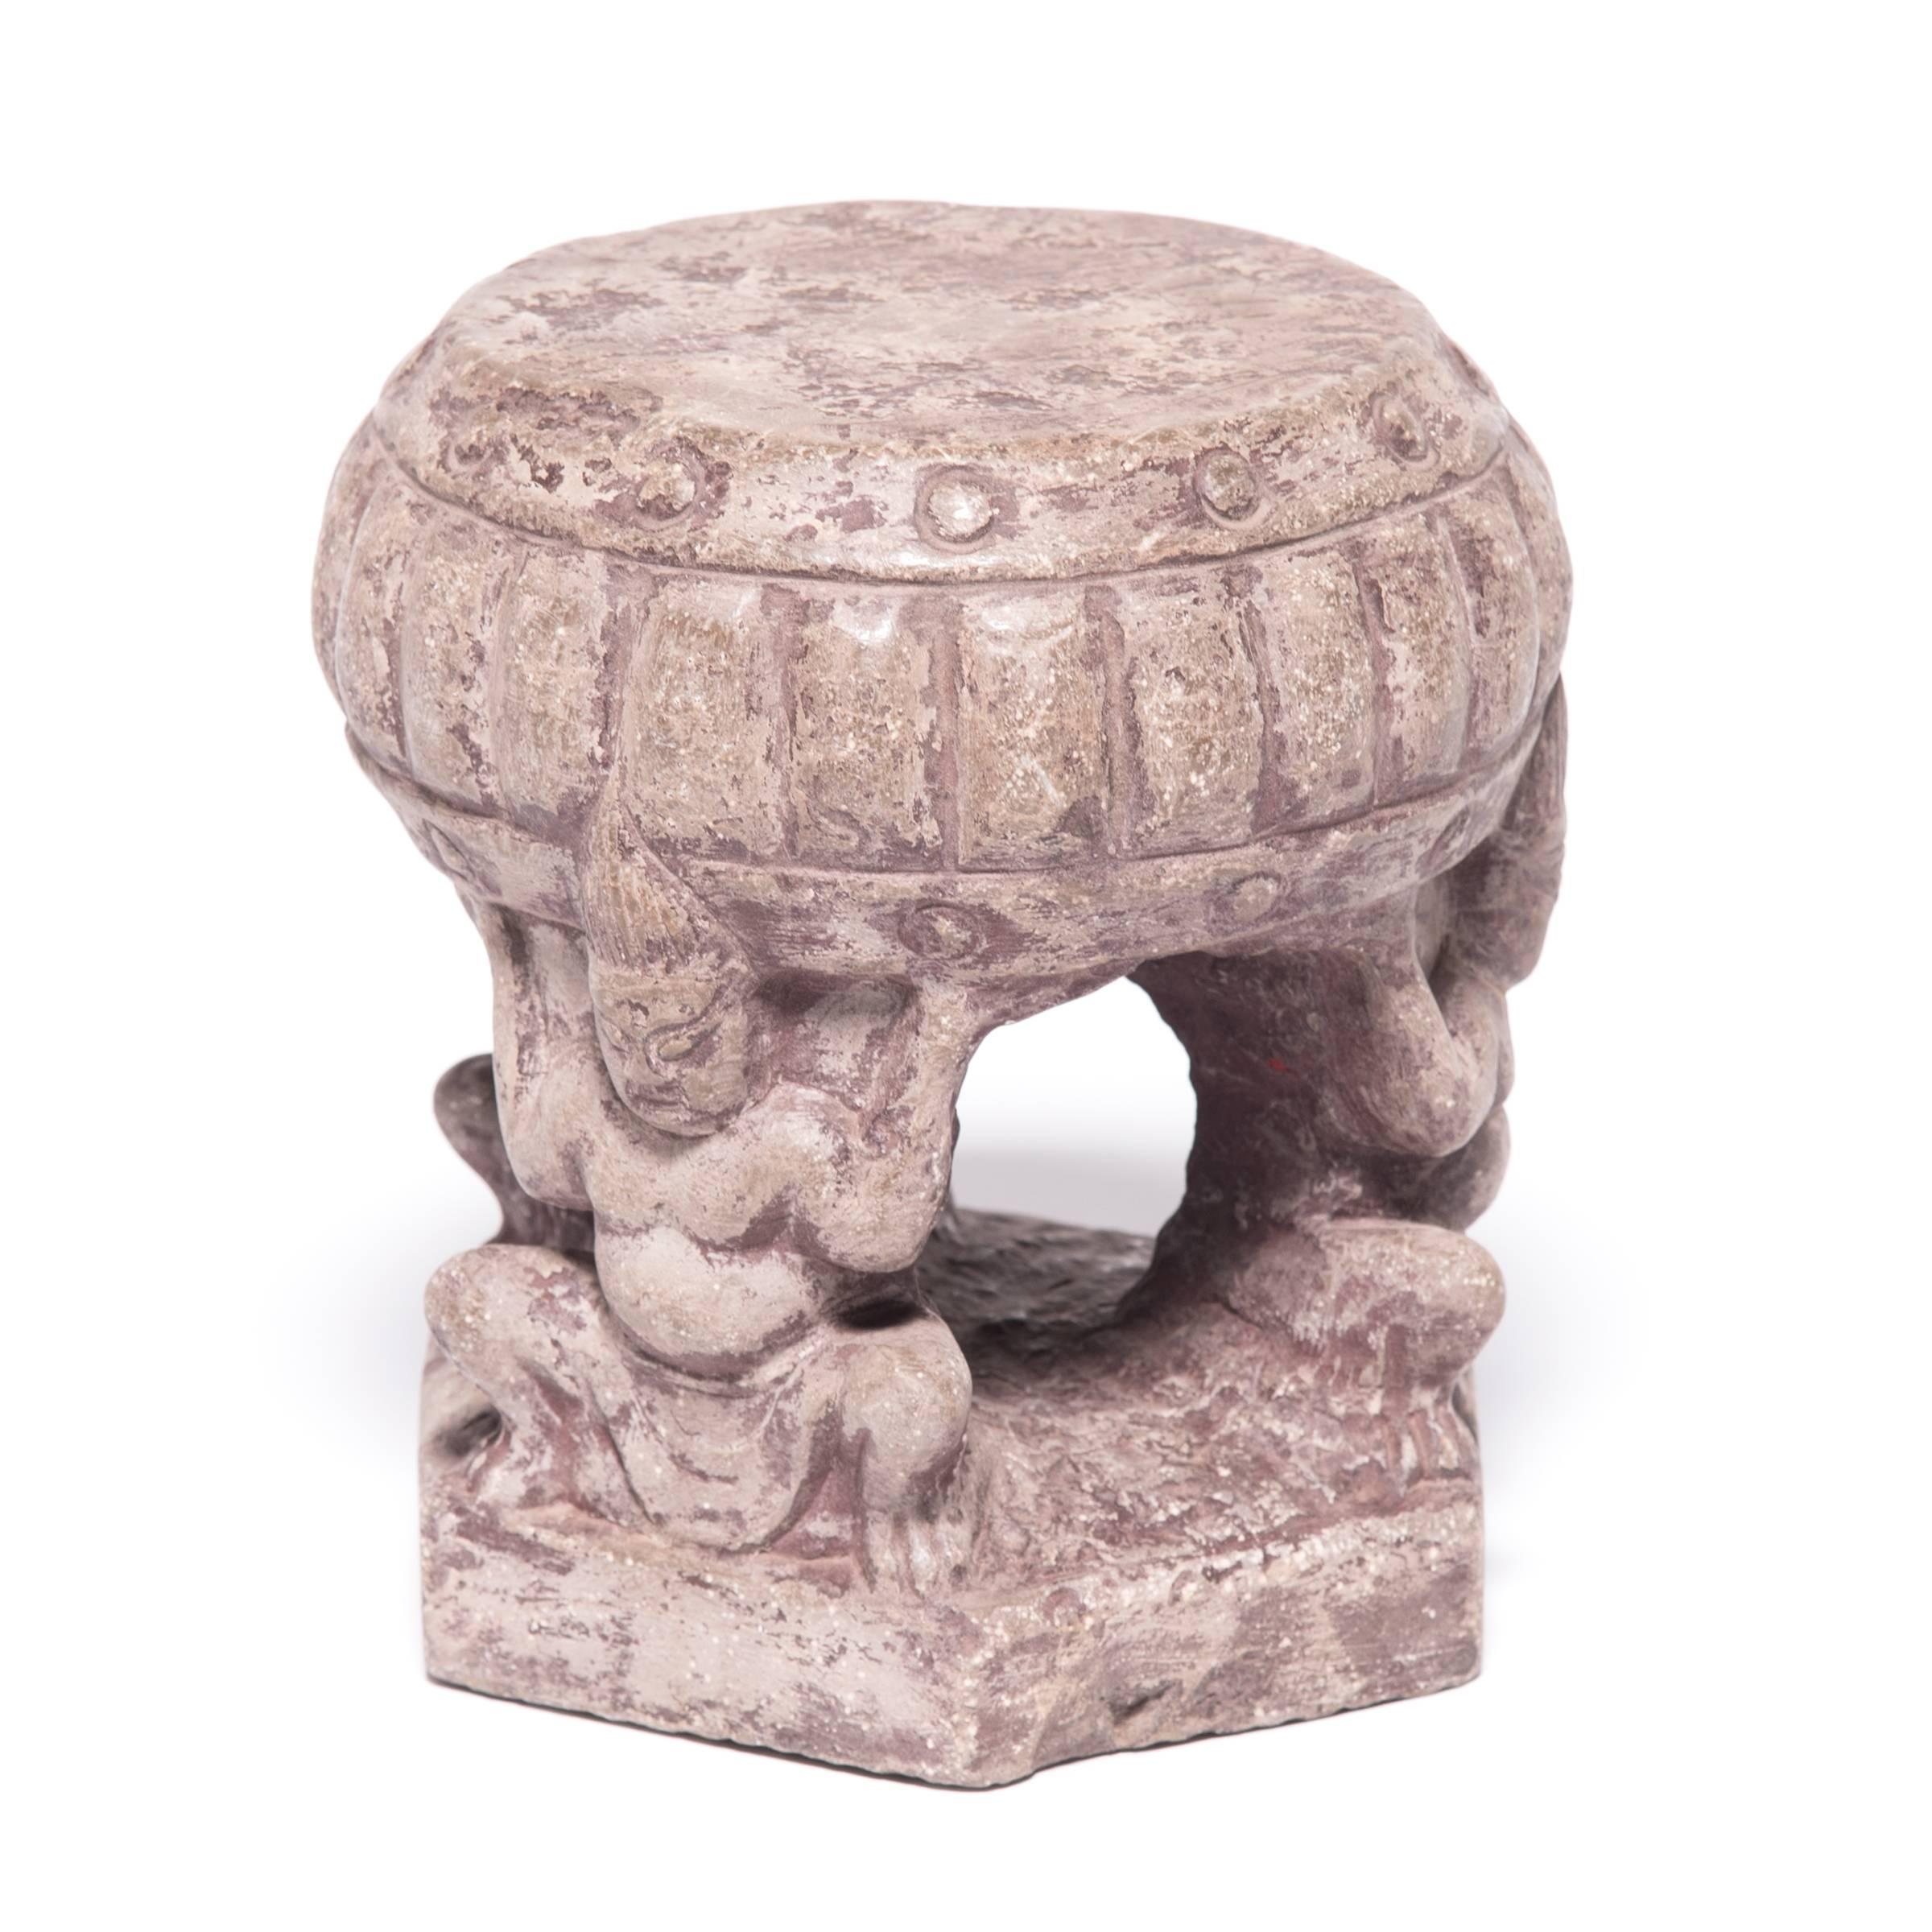 Probably paired up as architectural elements of a grand, Qing-dynasty Chinese home, this set of stone charms depicts a ring of squatting attendants hoisting a large drum. Symbols of power and wealth, the drums may have at one time been painted red